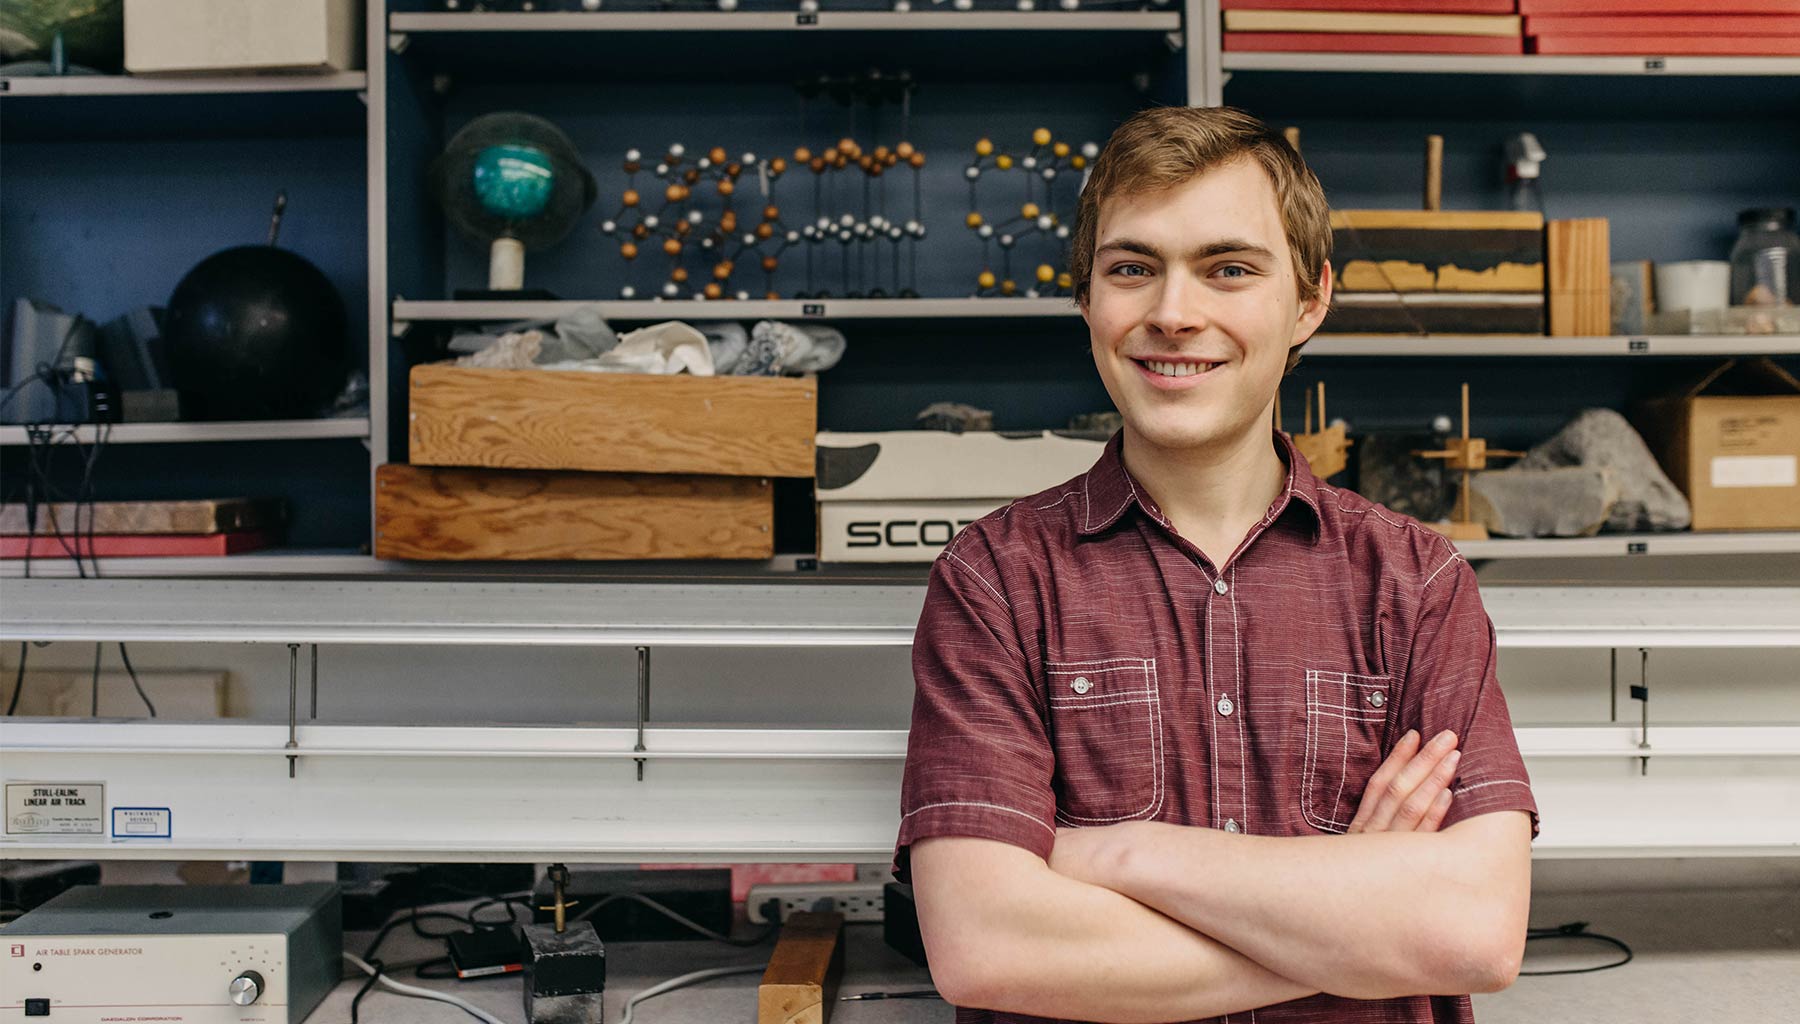 Jorin Graham stands in front of shelves filled with physics models. He folds his arms and smiles.